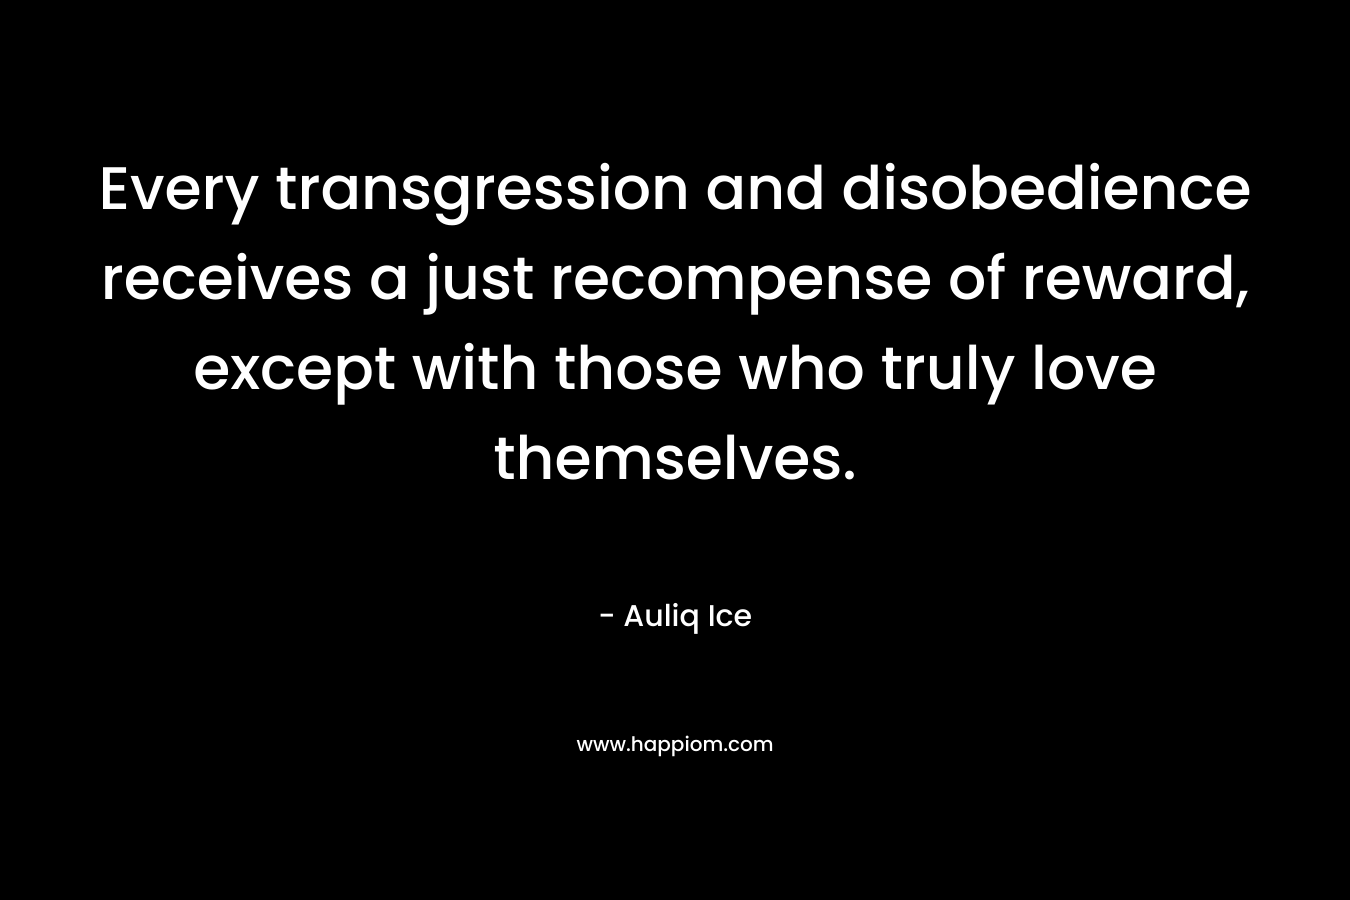 Every transgression and disobedience receives a just recompense of reward, except with those who truly love themselves. – Auliq Ice